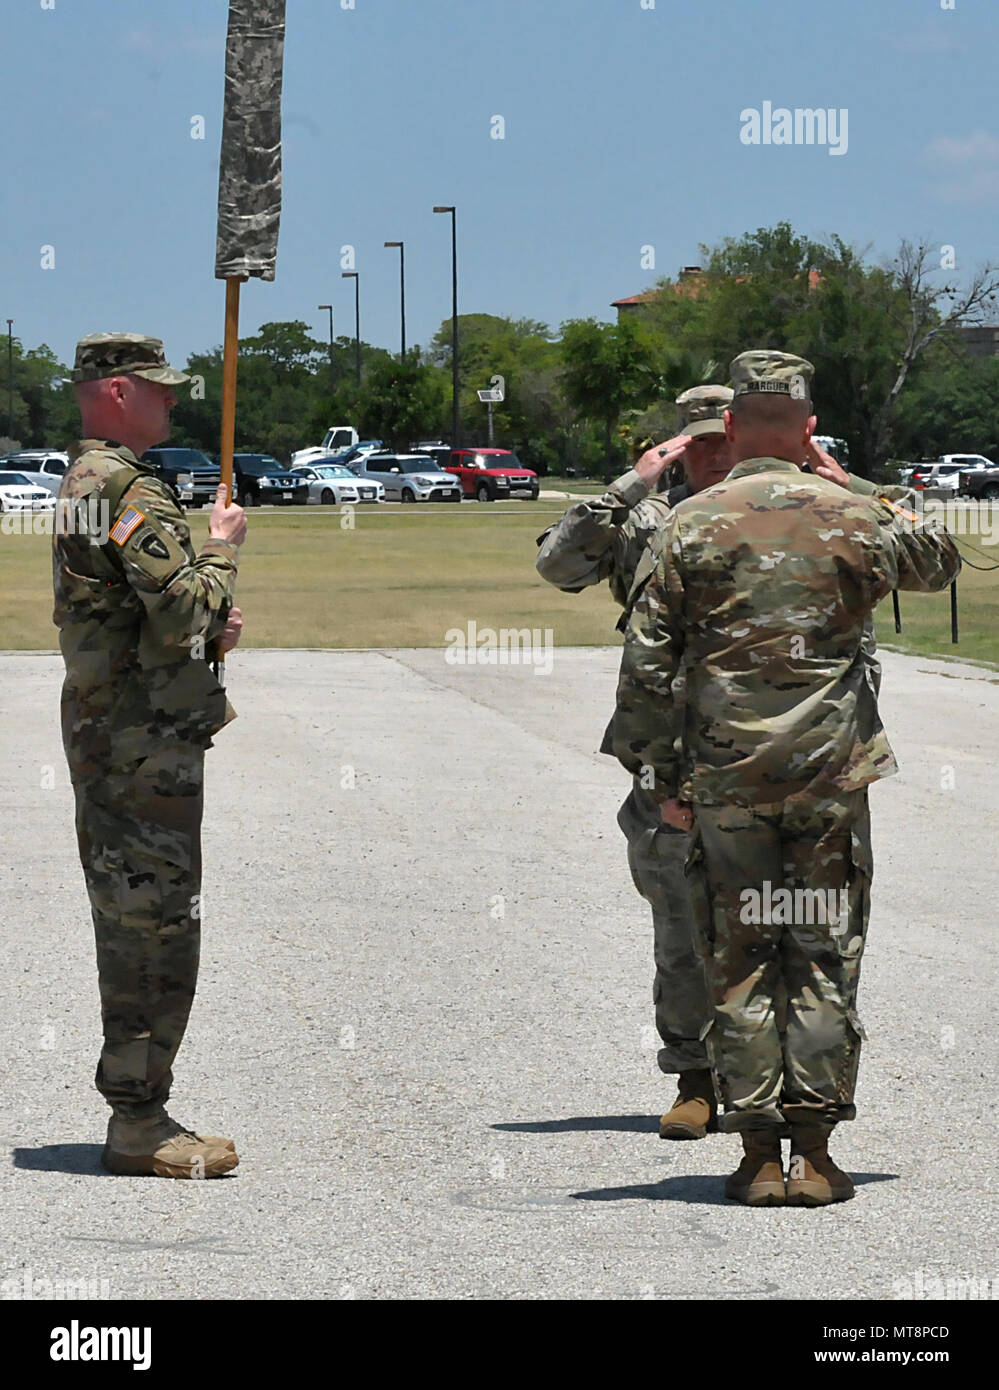 The 1st Battalion, 141st Infantry Regiment of the 72nd Infantry Brigade Combat Team, 36th Infantry Division, Texas Army National Guard held a deployment ceremony on April 16, 2018 at Joint Base San Antonio - Fort Sam Houston, Texas.  Task Force Alamo is set to deploy to the Horn of Africa to take over duties from their Texas sister, the 3rd Battalion, 144th Infantry Regiment of the 56th IBCT.  Friends and family said farewell for the unit set to deploy later this month.  (Texas Army National Guard photo by Master Sgt. Michael Leslie, 36th Infantry Division Public Affairs) Stock Photo